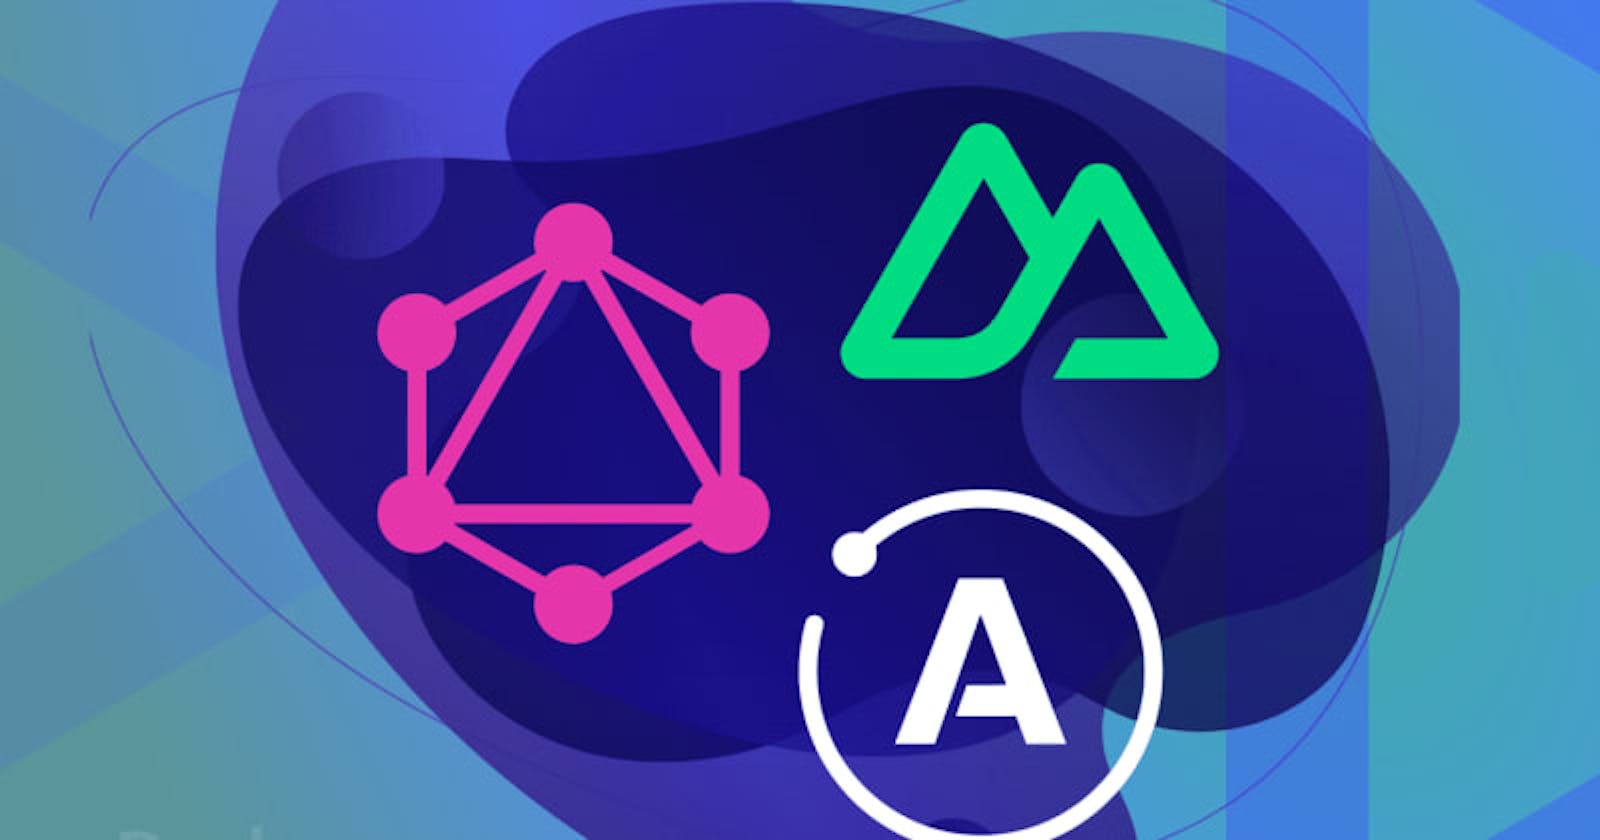 Integrating GraphQL into Nuxt apps with Nuxt Apollo